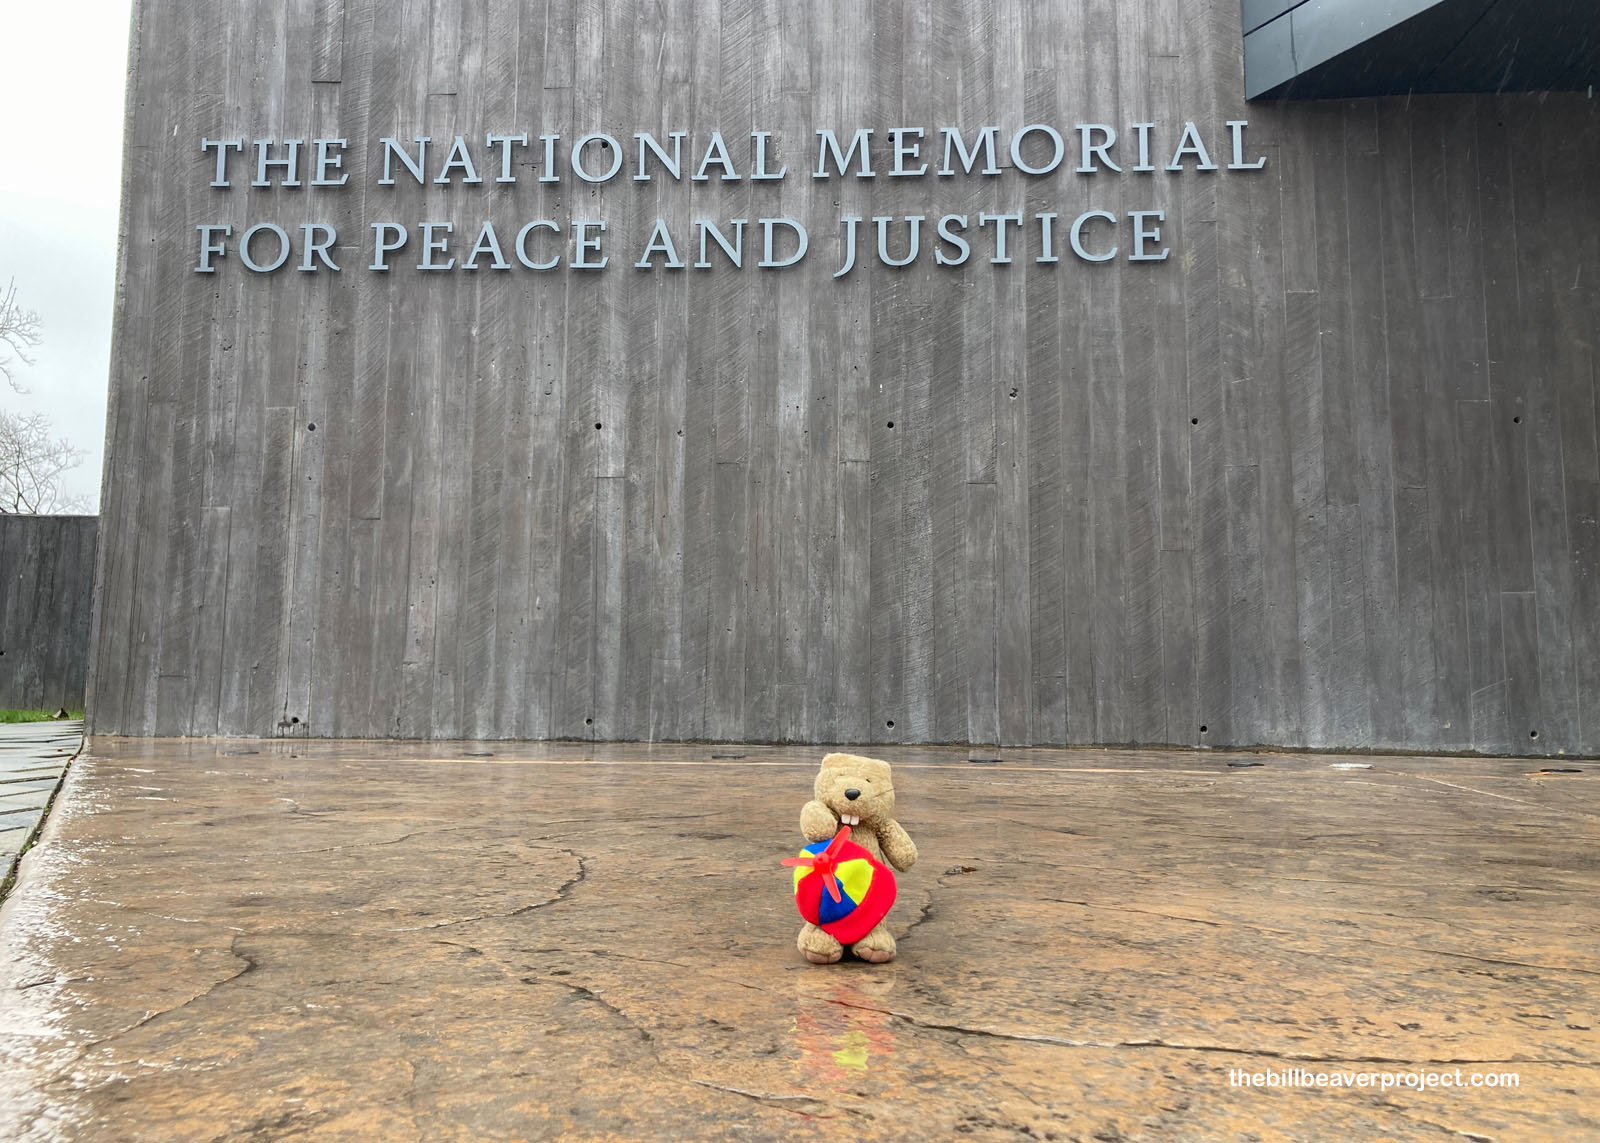 The National Memorial for Peace and Justice